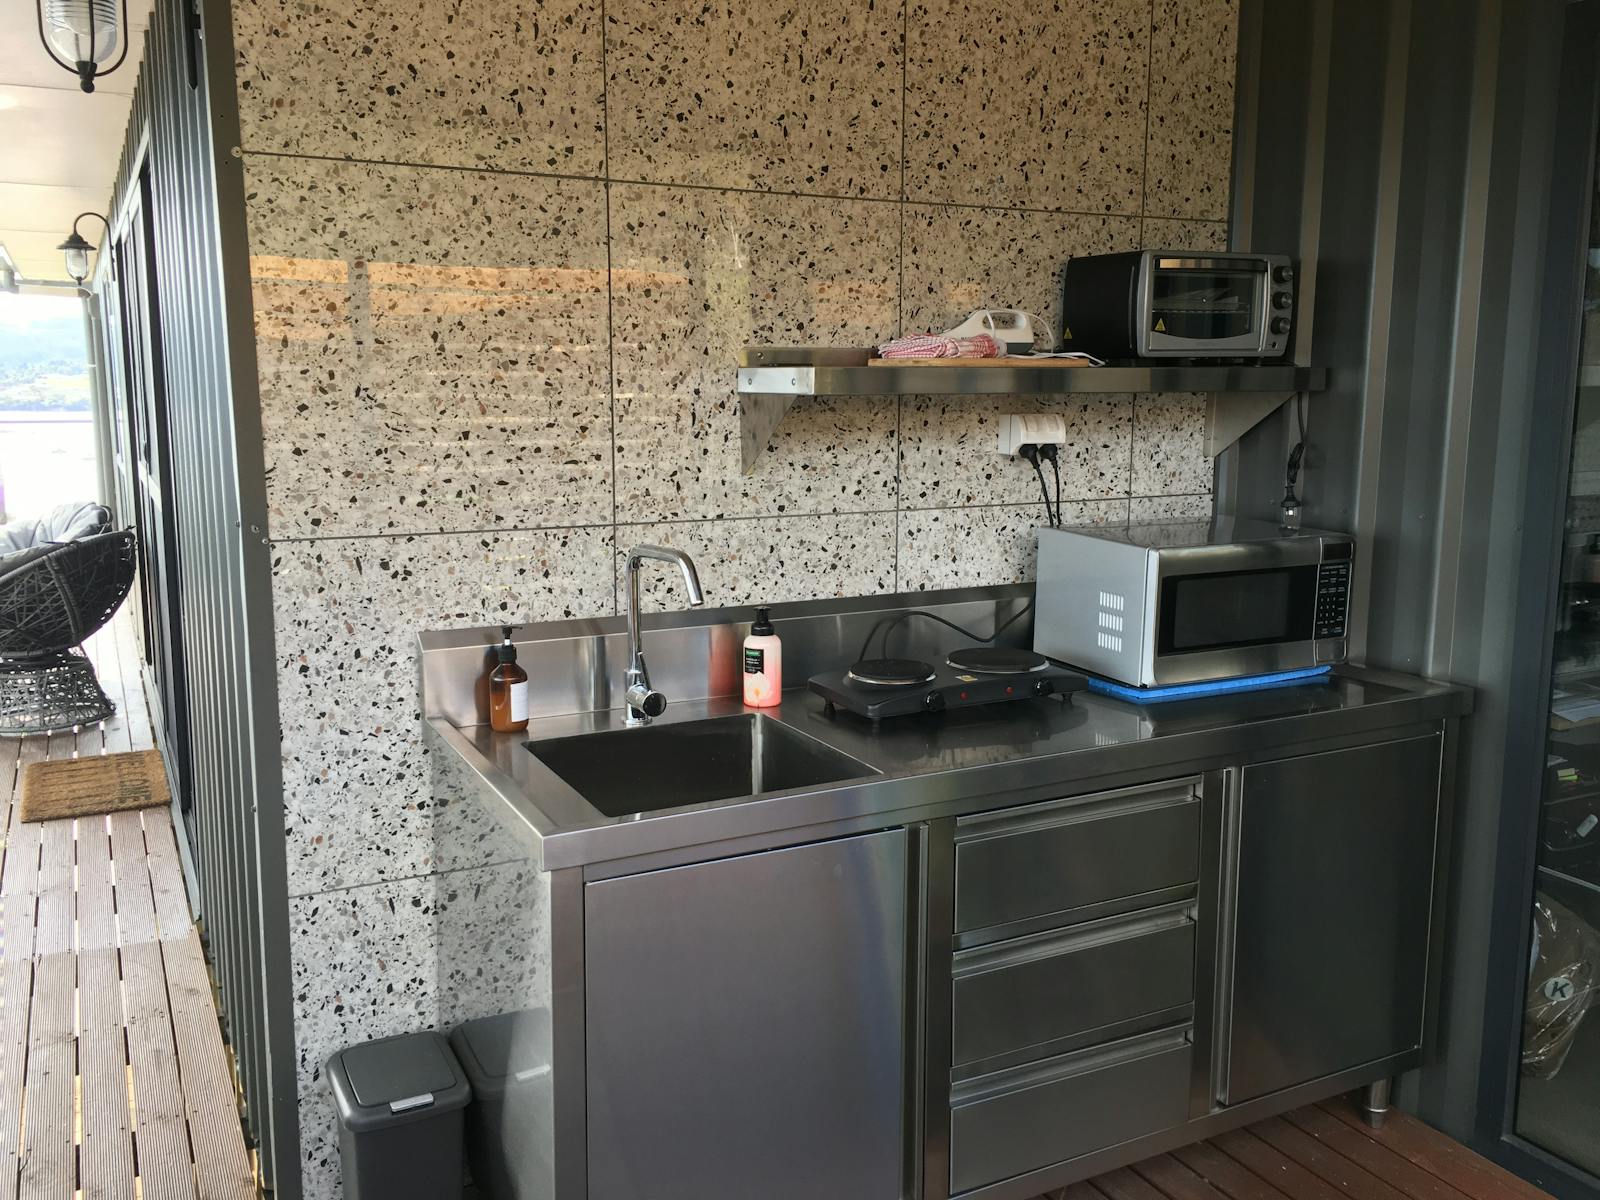 Stainless steel outdoor kitchen with cooking facilities and utensils, crockery and cutlery to cook.